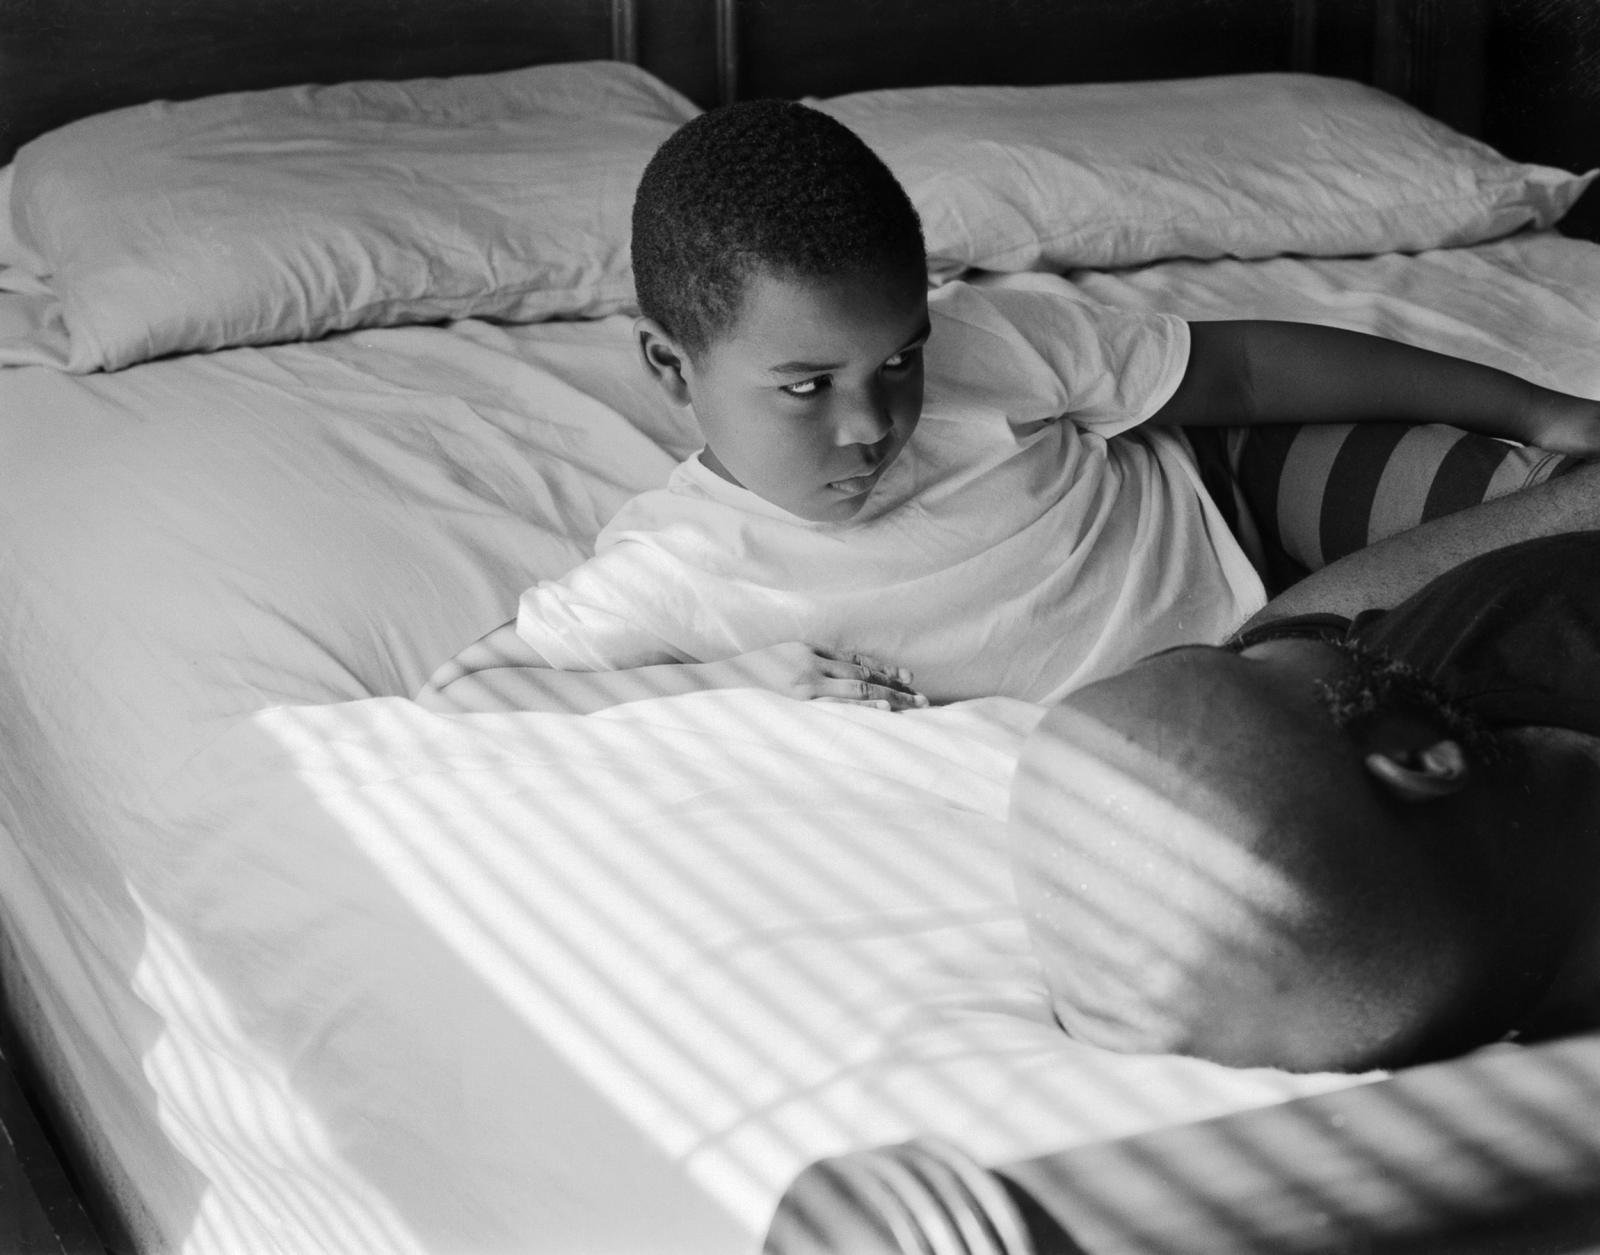 Thumbnail of LJ Laying on The Bed, 2020, 20x2_oto by&nbsp; Rashod Taylor .